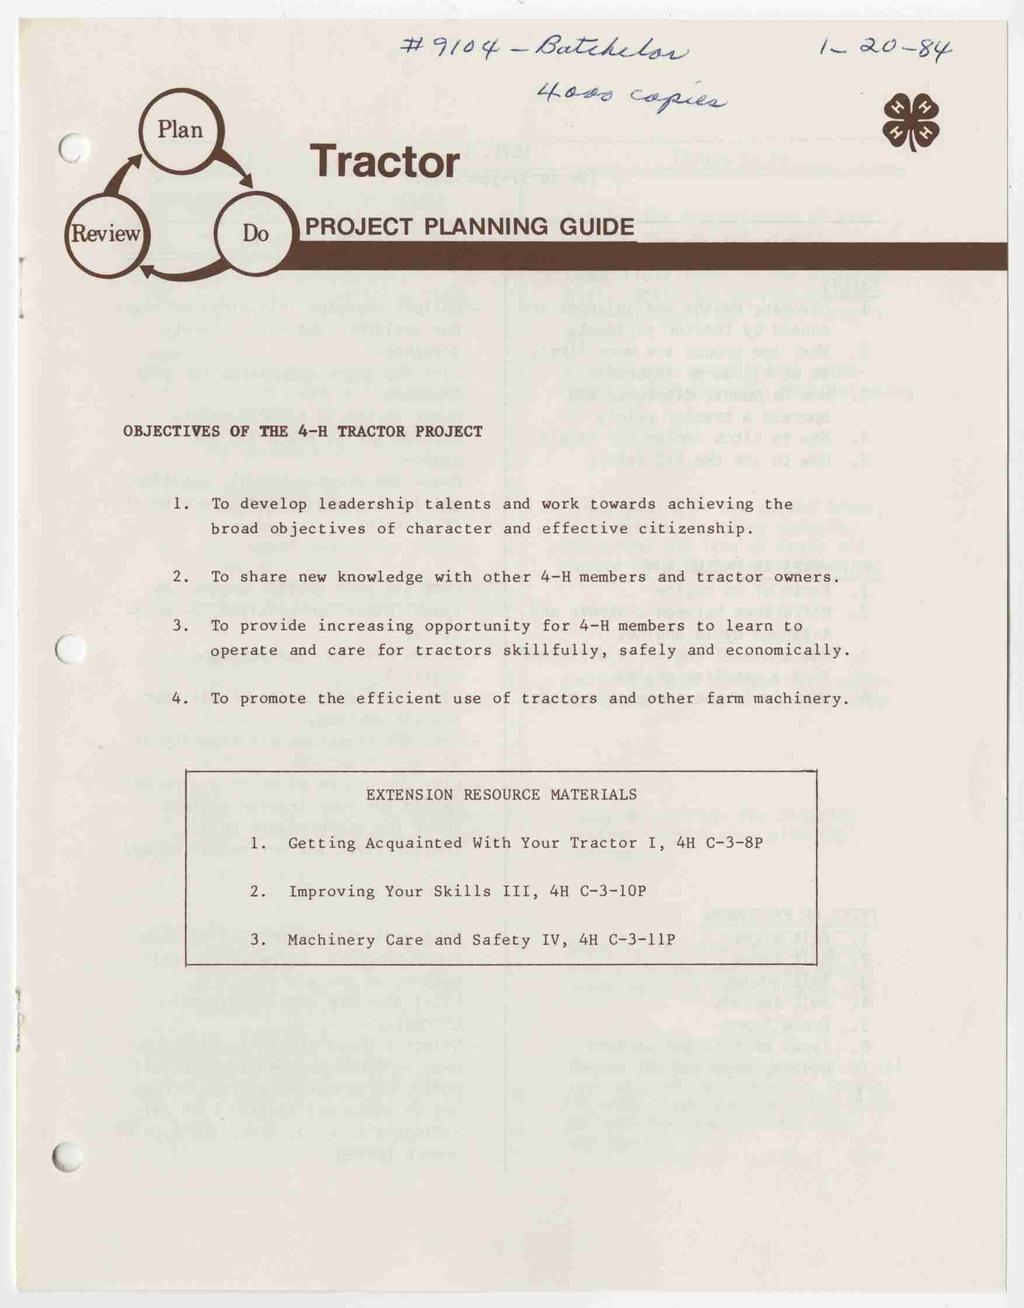 4i 7/a 96.4 azzzw A, swigy, Z%:6L Z? C; jfl1<;éz, Tractor PROJECT PLANNING GUIDE OBJECTIVES OF THE 4-H TRACTOR PROJECT 1.